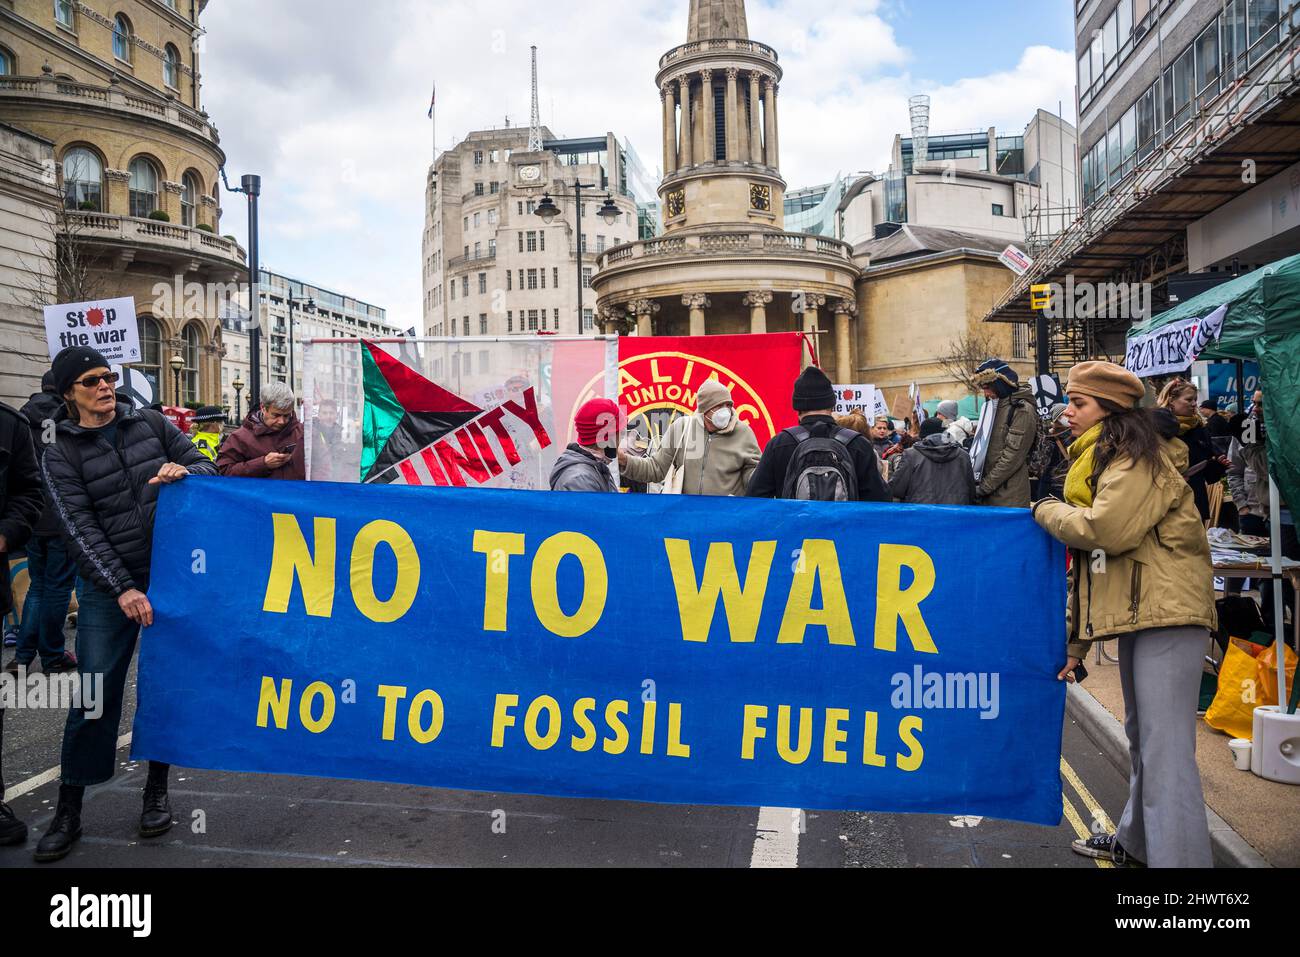 'No to war, no to fossil fuels' banner, Stop the War demonstration organised by Stop the War Coalition, London, UK, 6th March 2022 Stock Photo